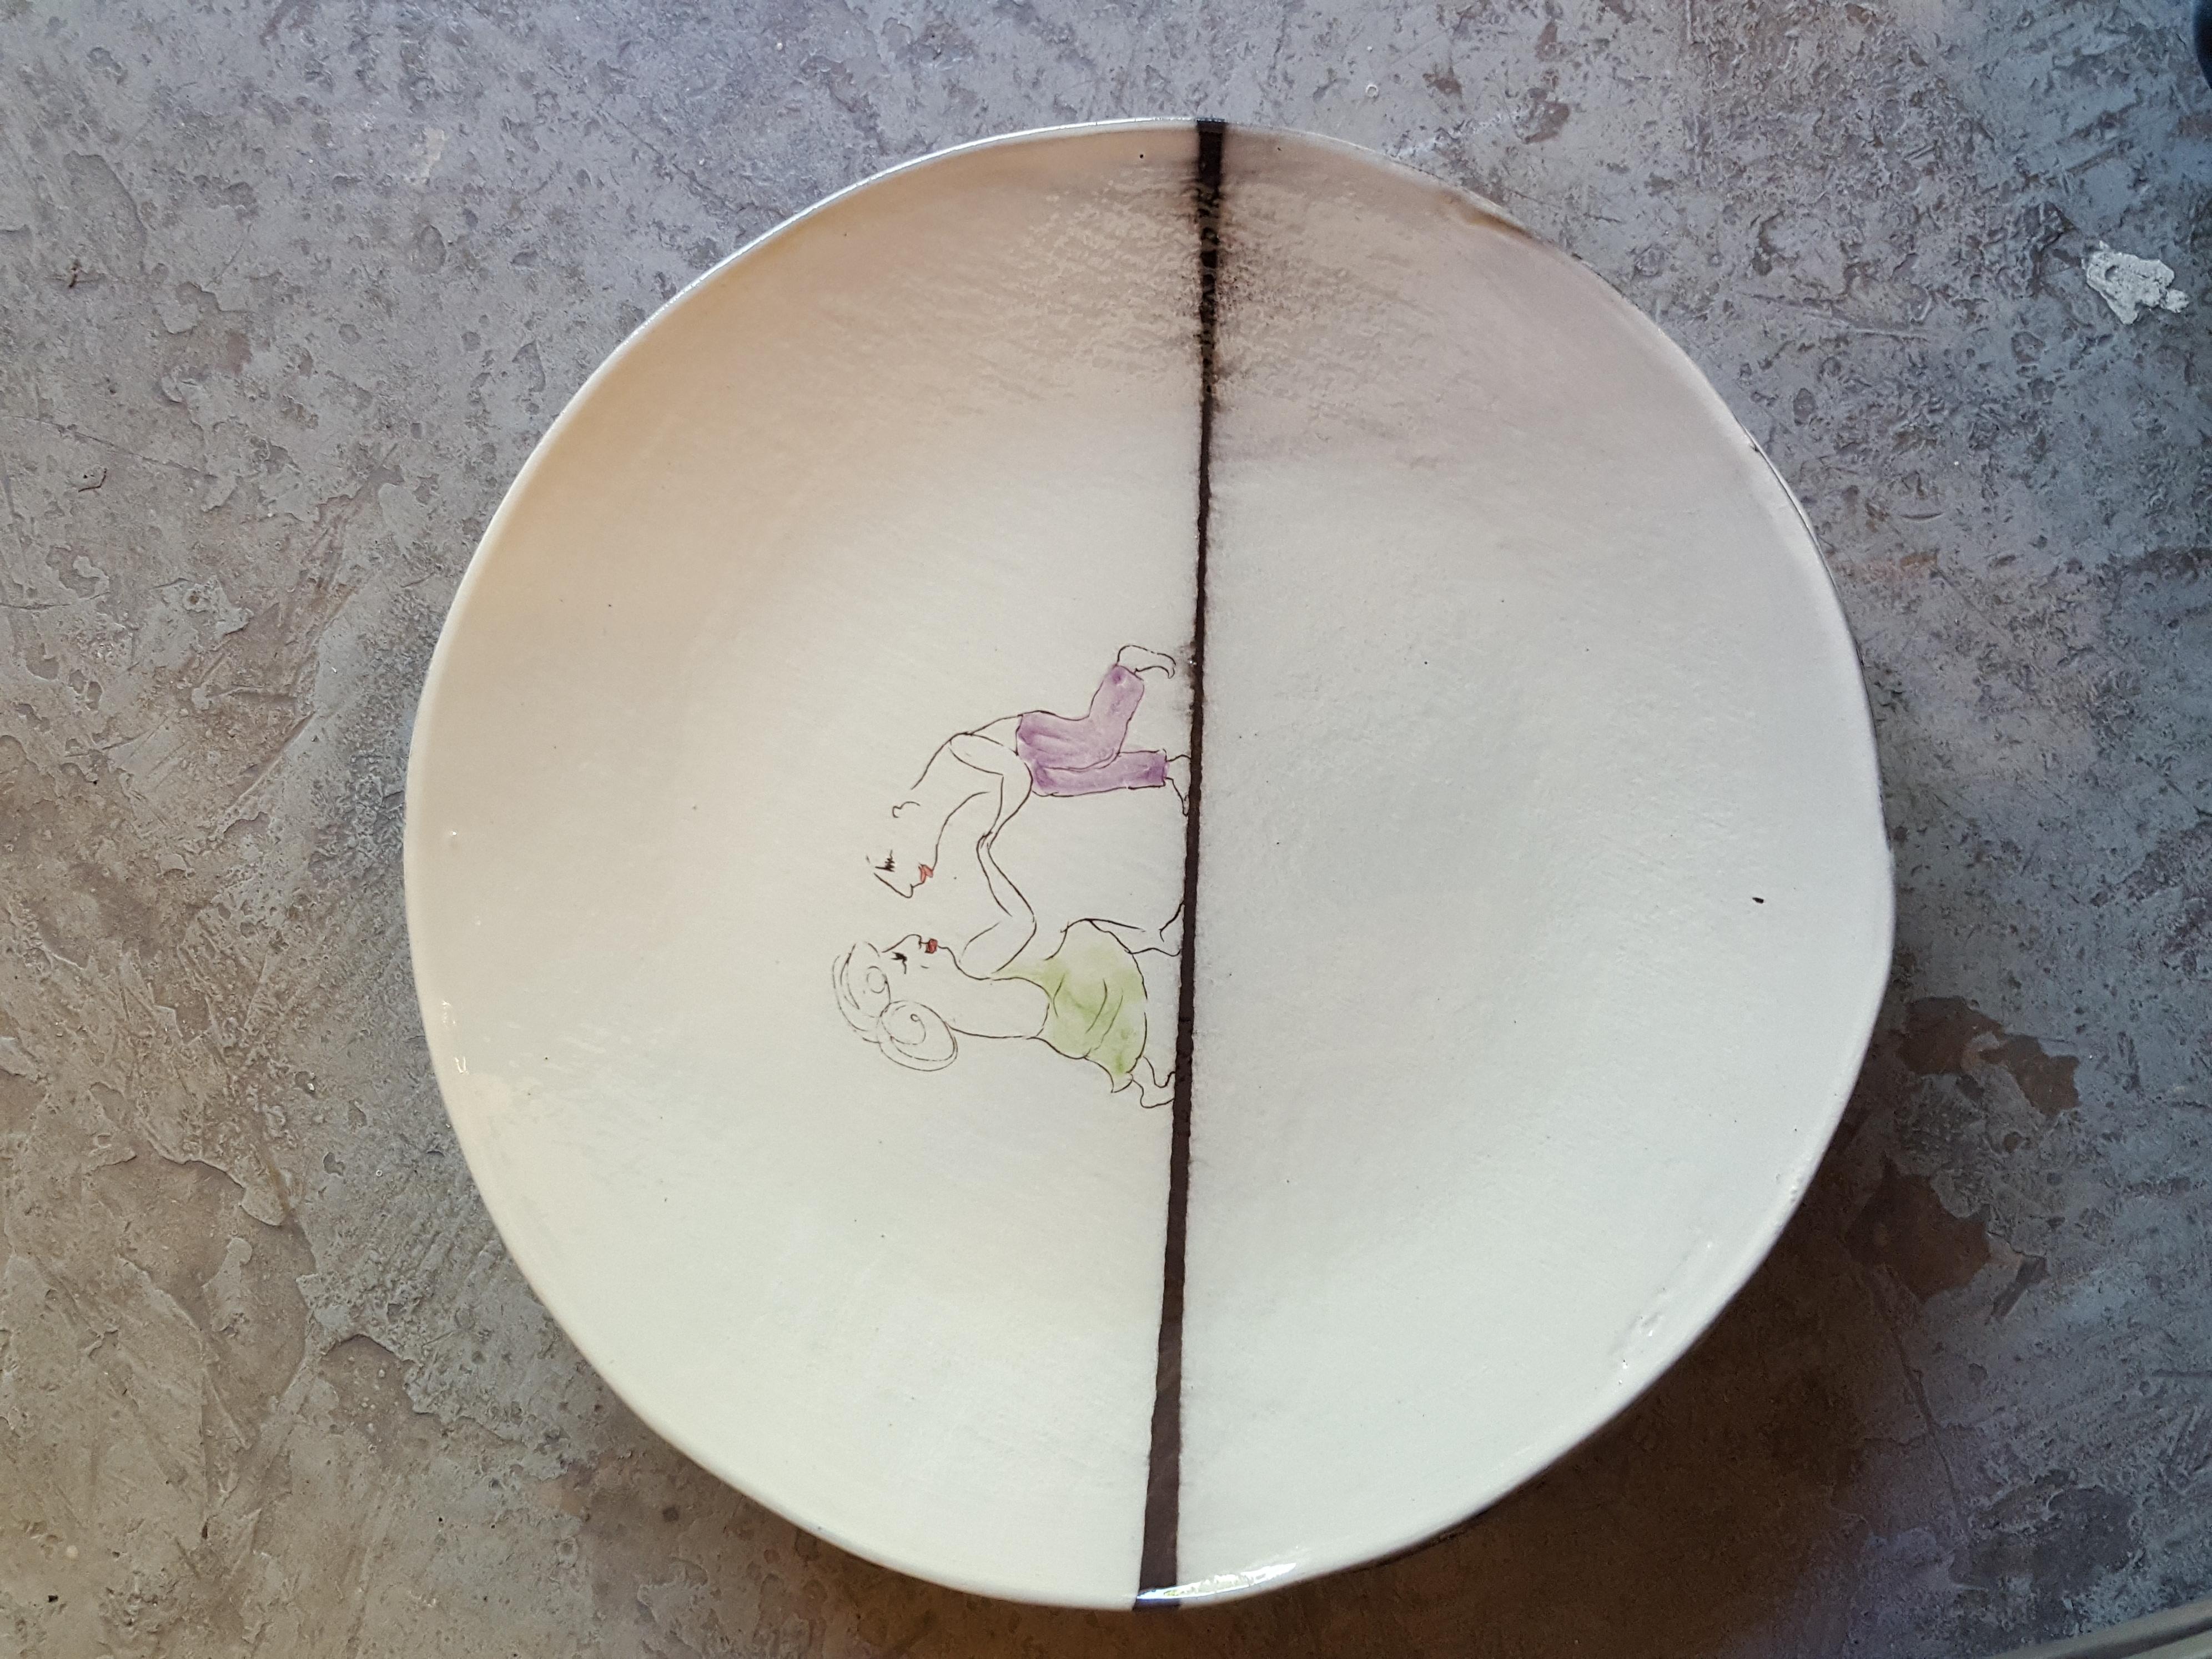 Painted Unique French Artist's Ceramic Dinner Plates For Sale